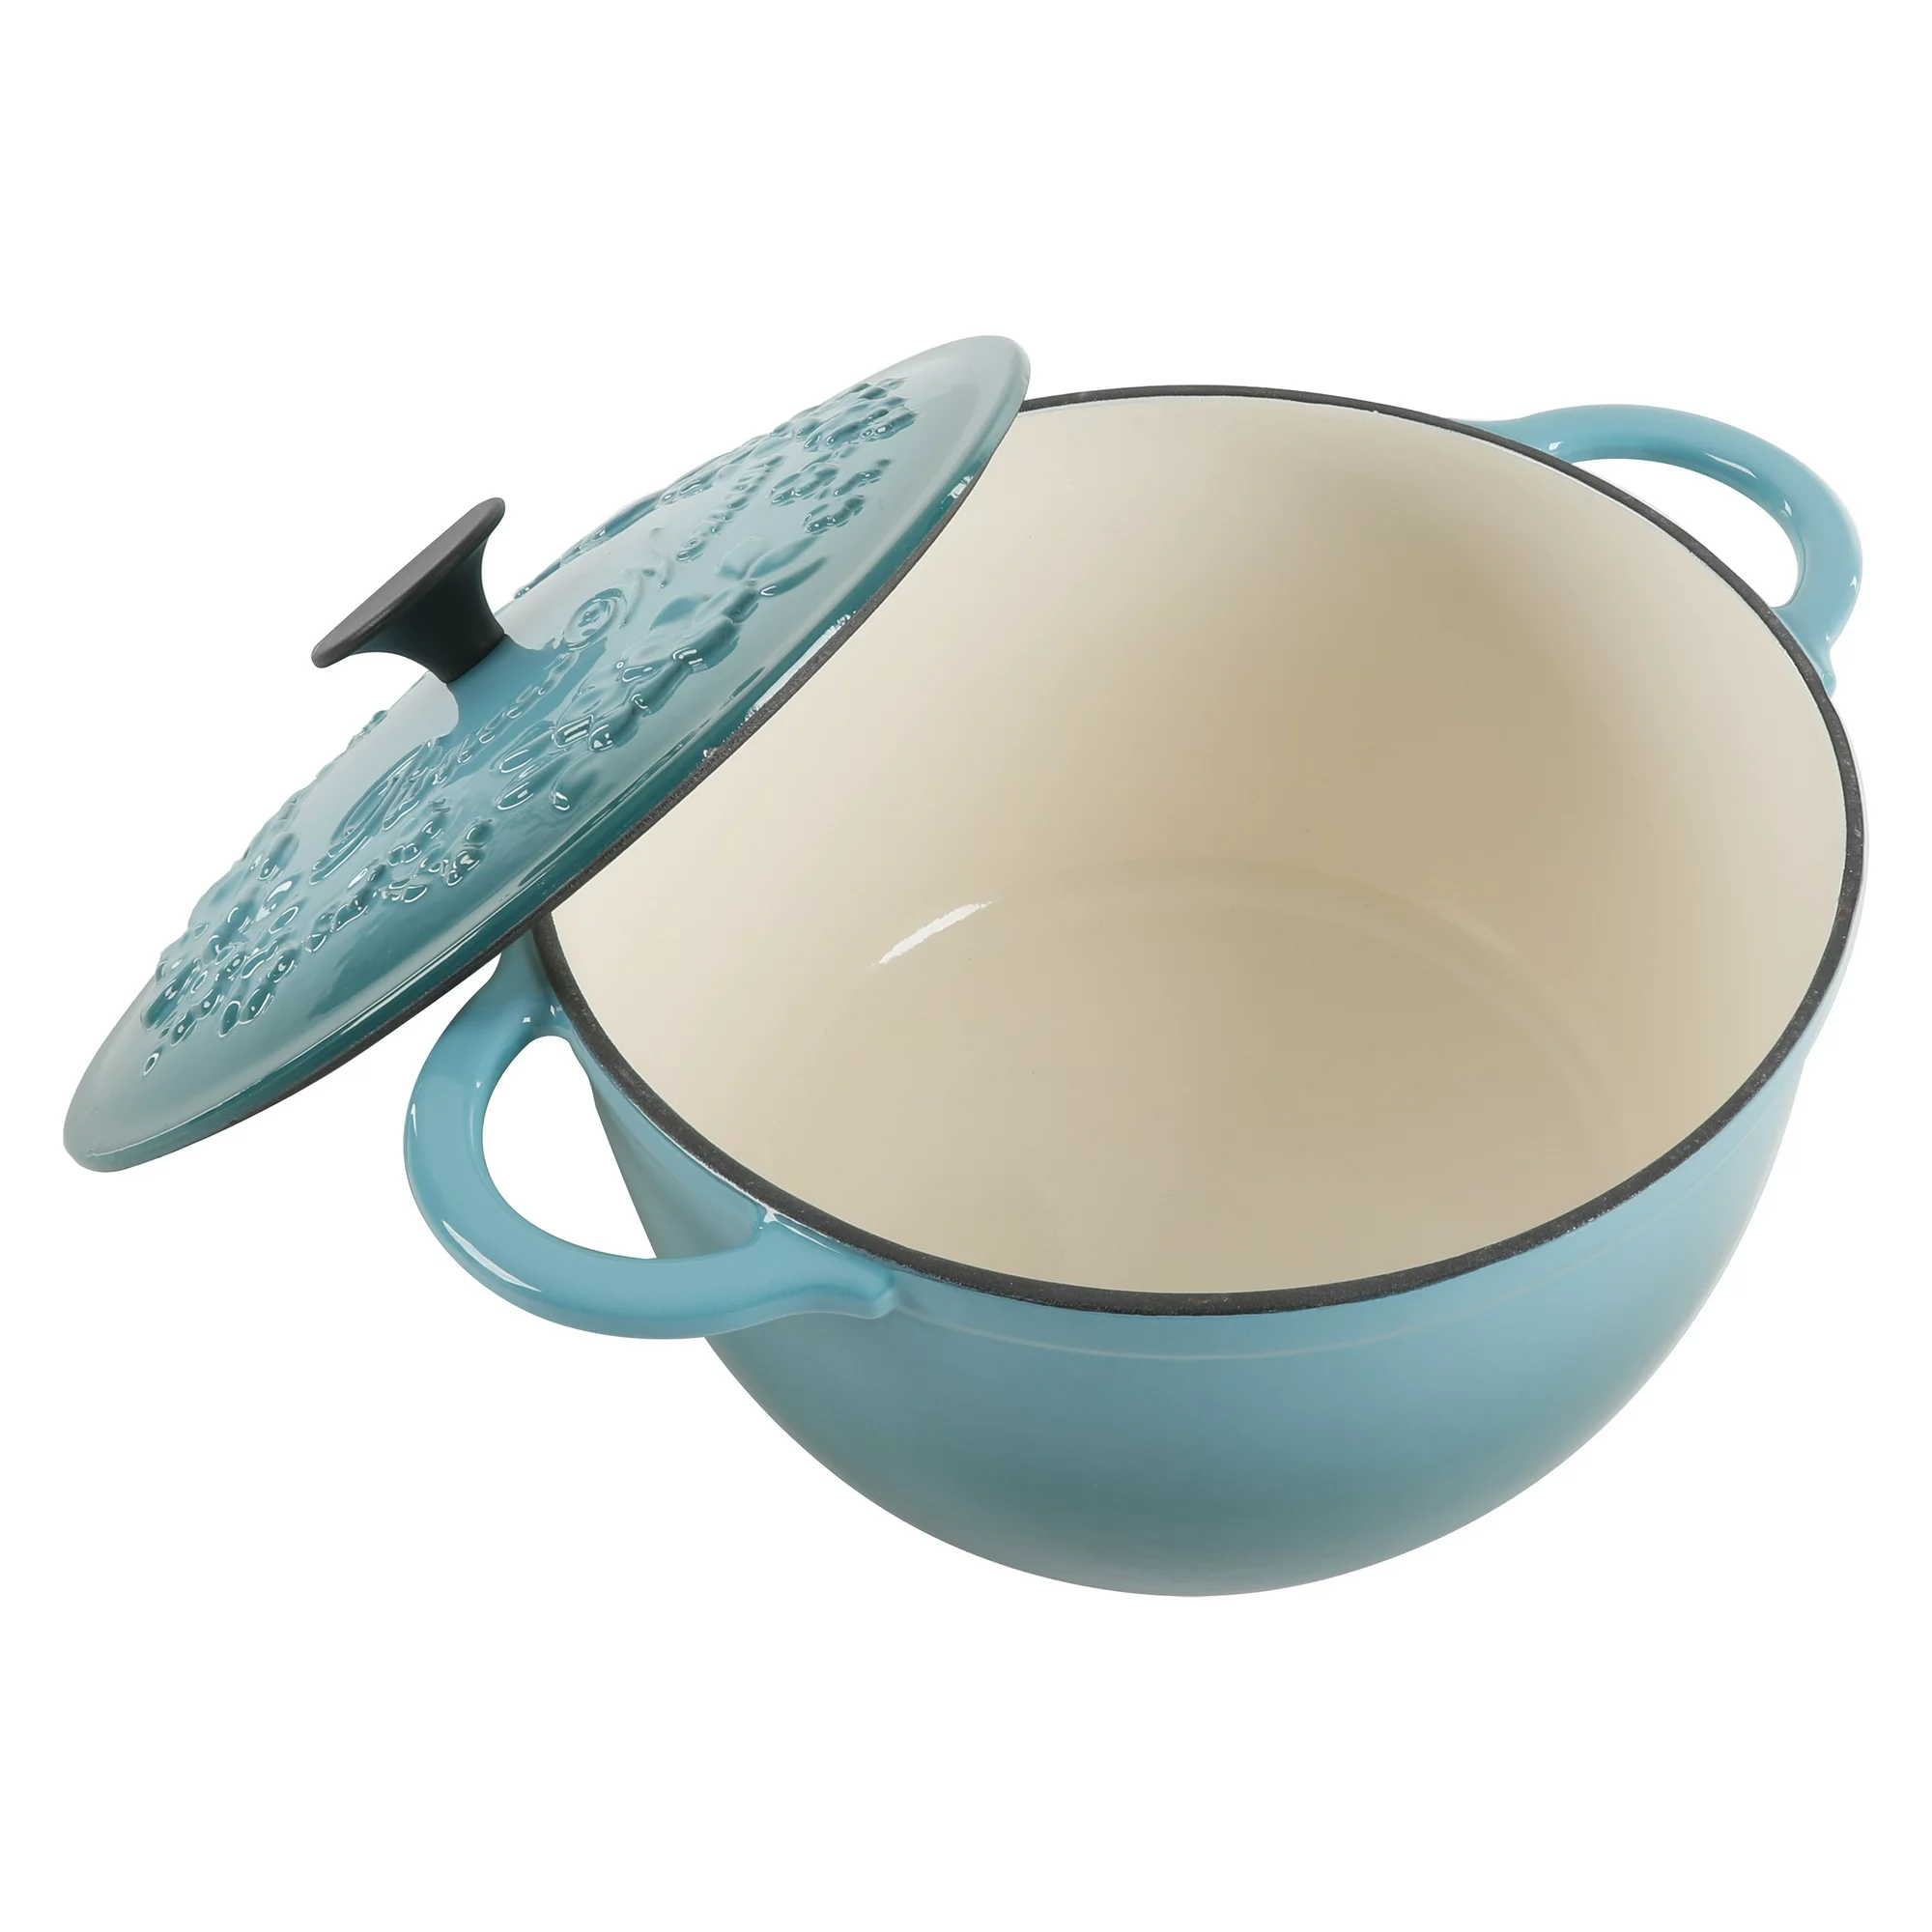 https://discounttoday.net/wp-content/uploads/2022/12/The-Pioneer-Woman-Timeless-Beauty-Enamel-on-Cast-Iron-6-Qt-Dutch-Oven-Turquoise2.webp